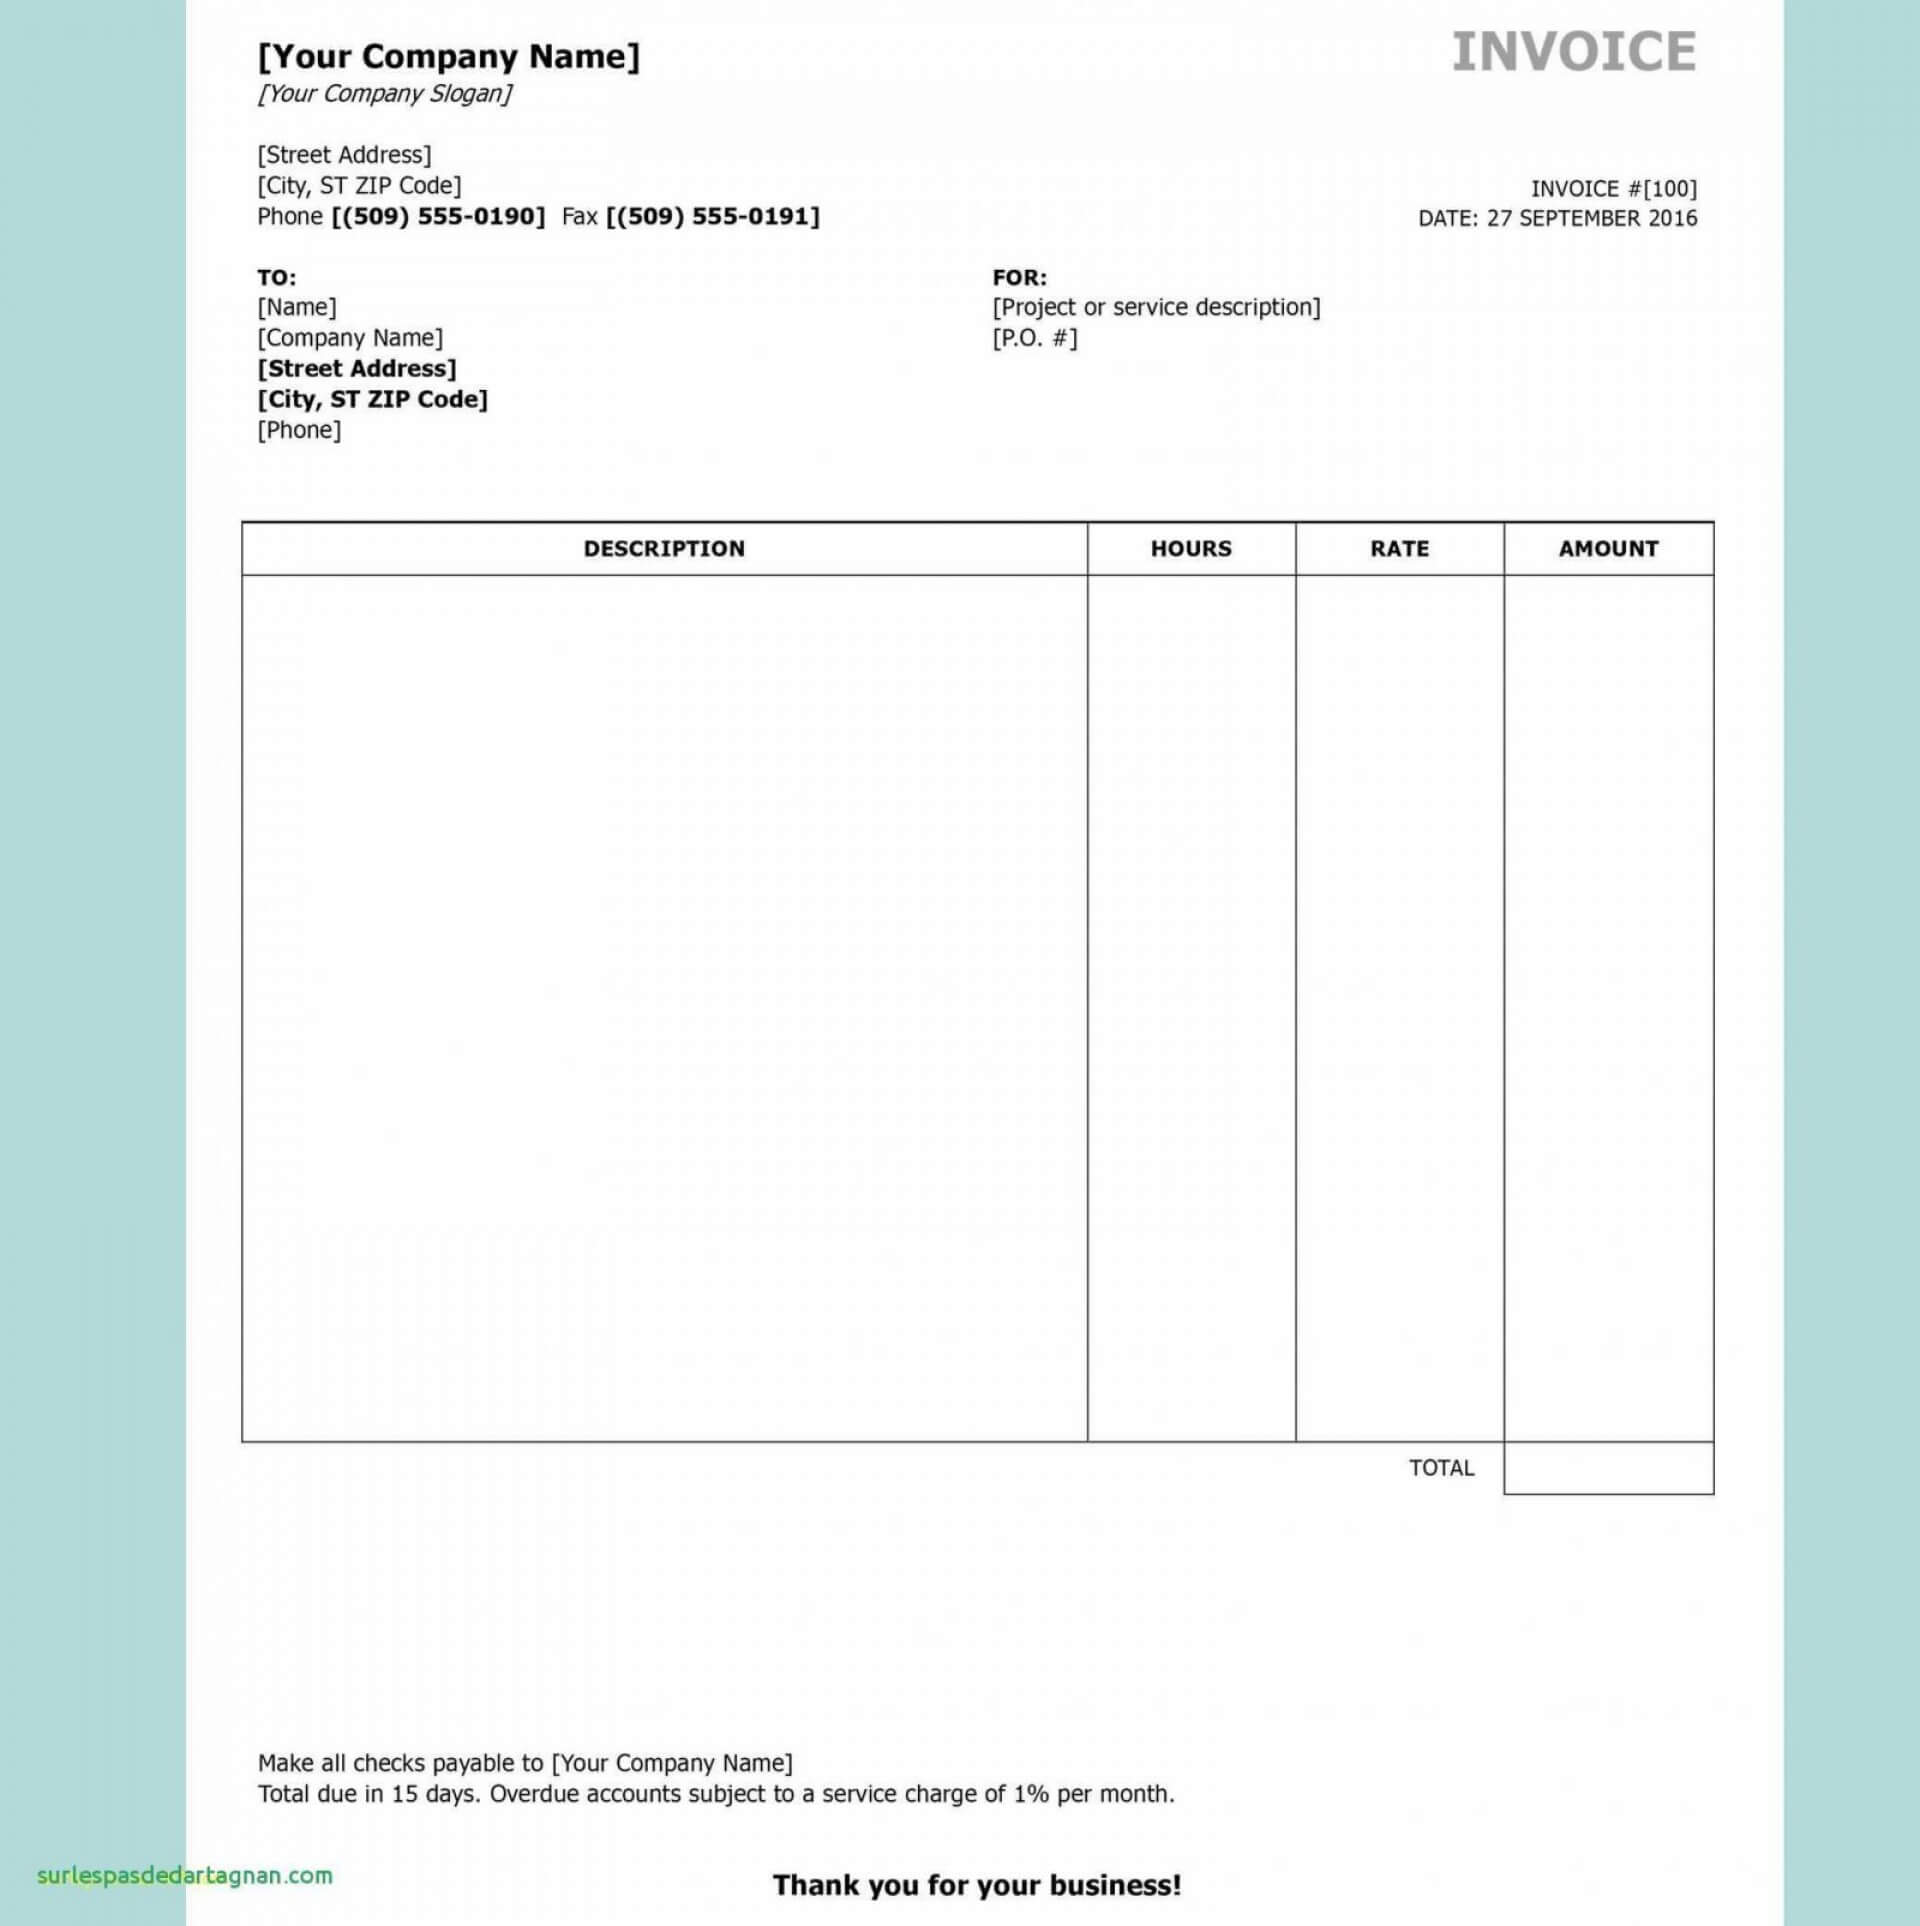 invoice simple appfor andraoid